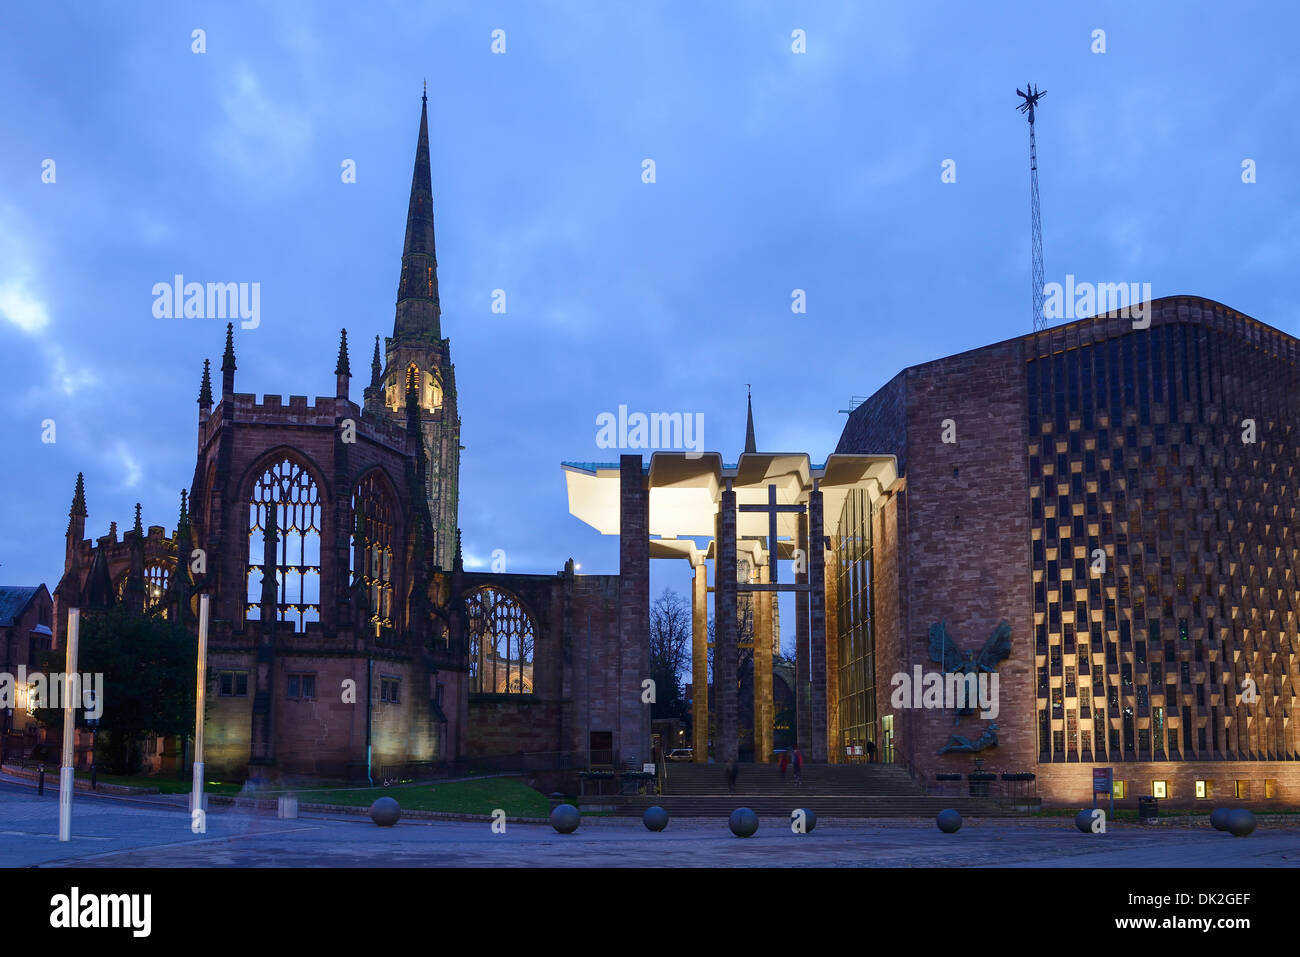 The old Coventry Cathedral alongside the New Cathedral at dusk Stock Photo